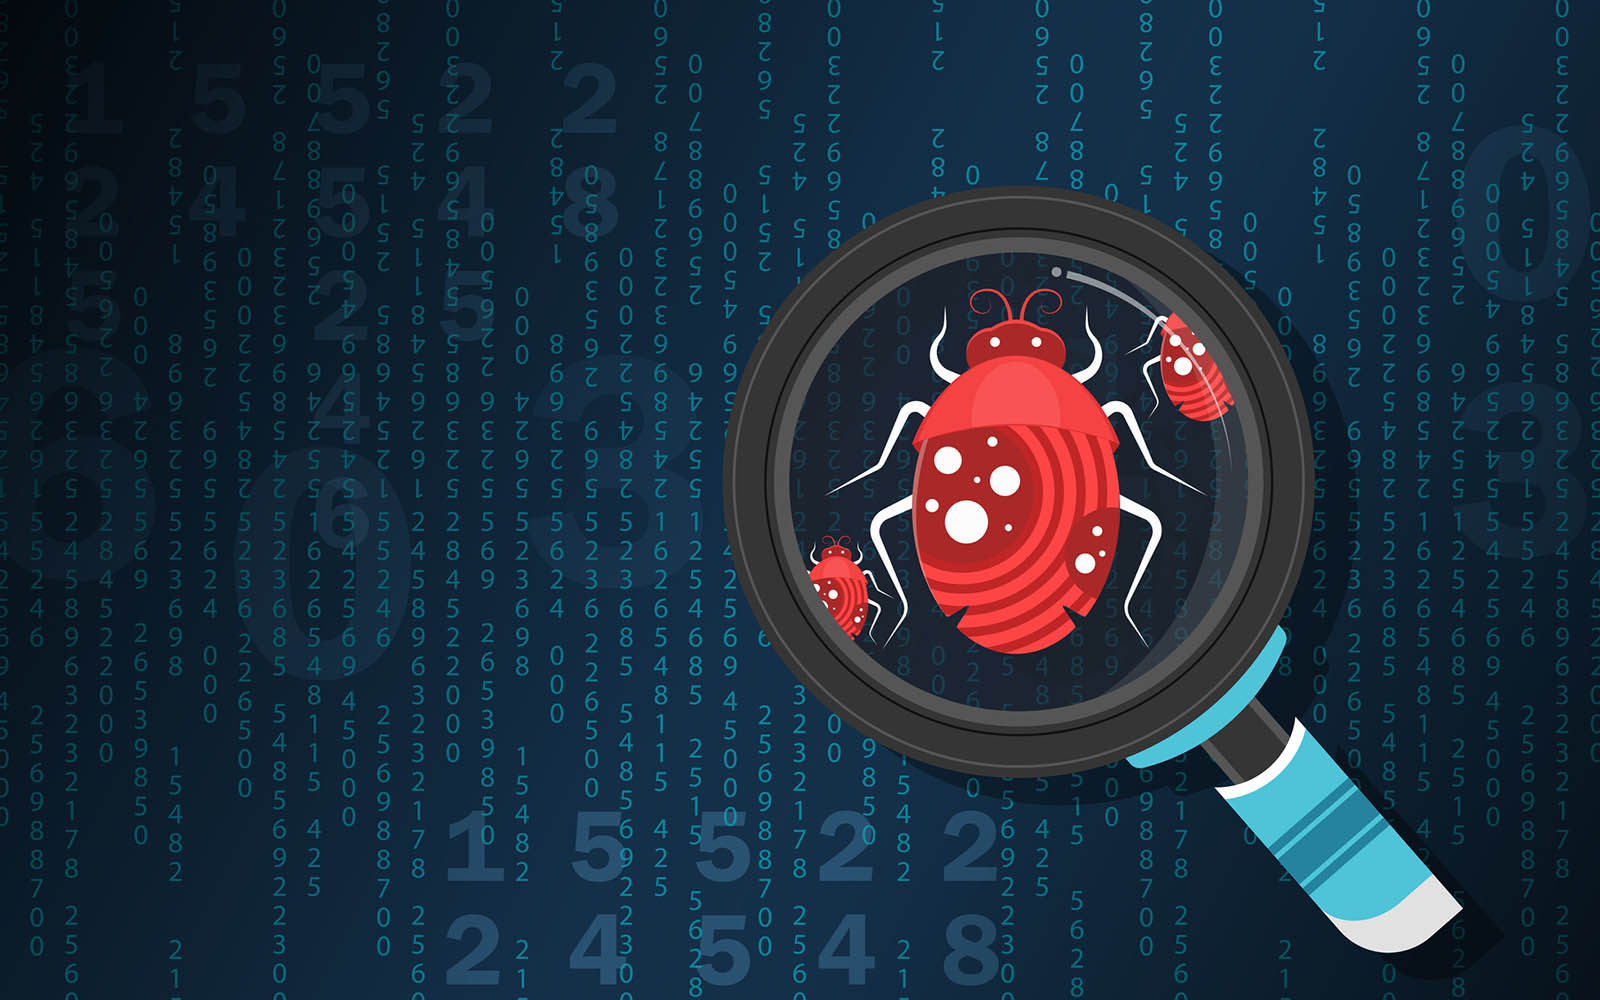 CrowdStrike Uses Similarity Search to Detect Script-Based Malware